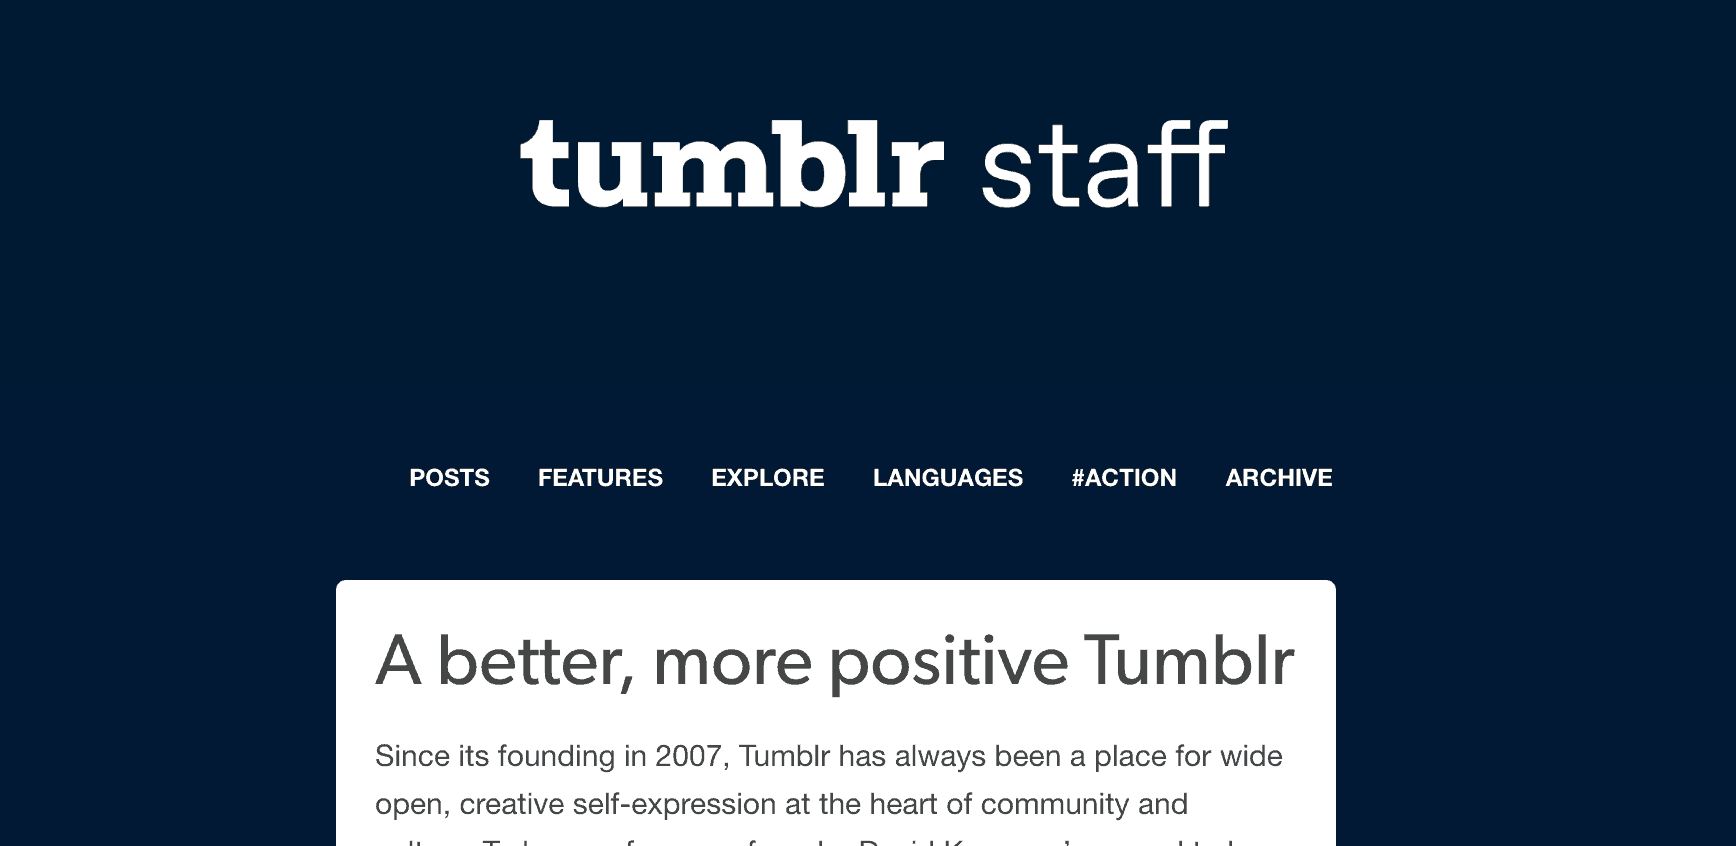 Tumblr staff implements a more positive approach on the platform by banning explicit adult content.